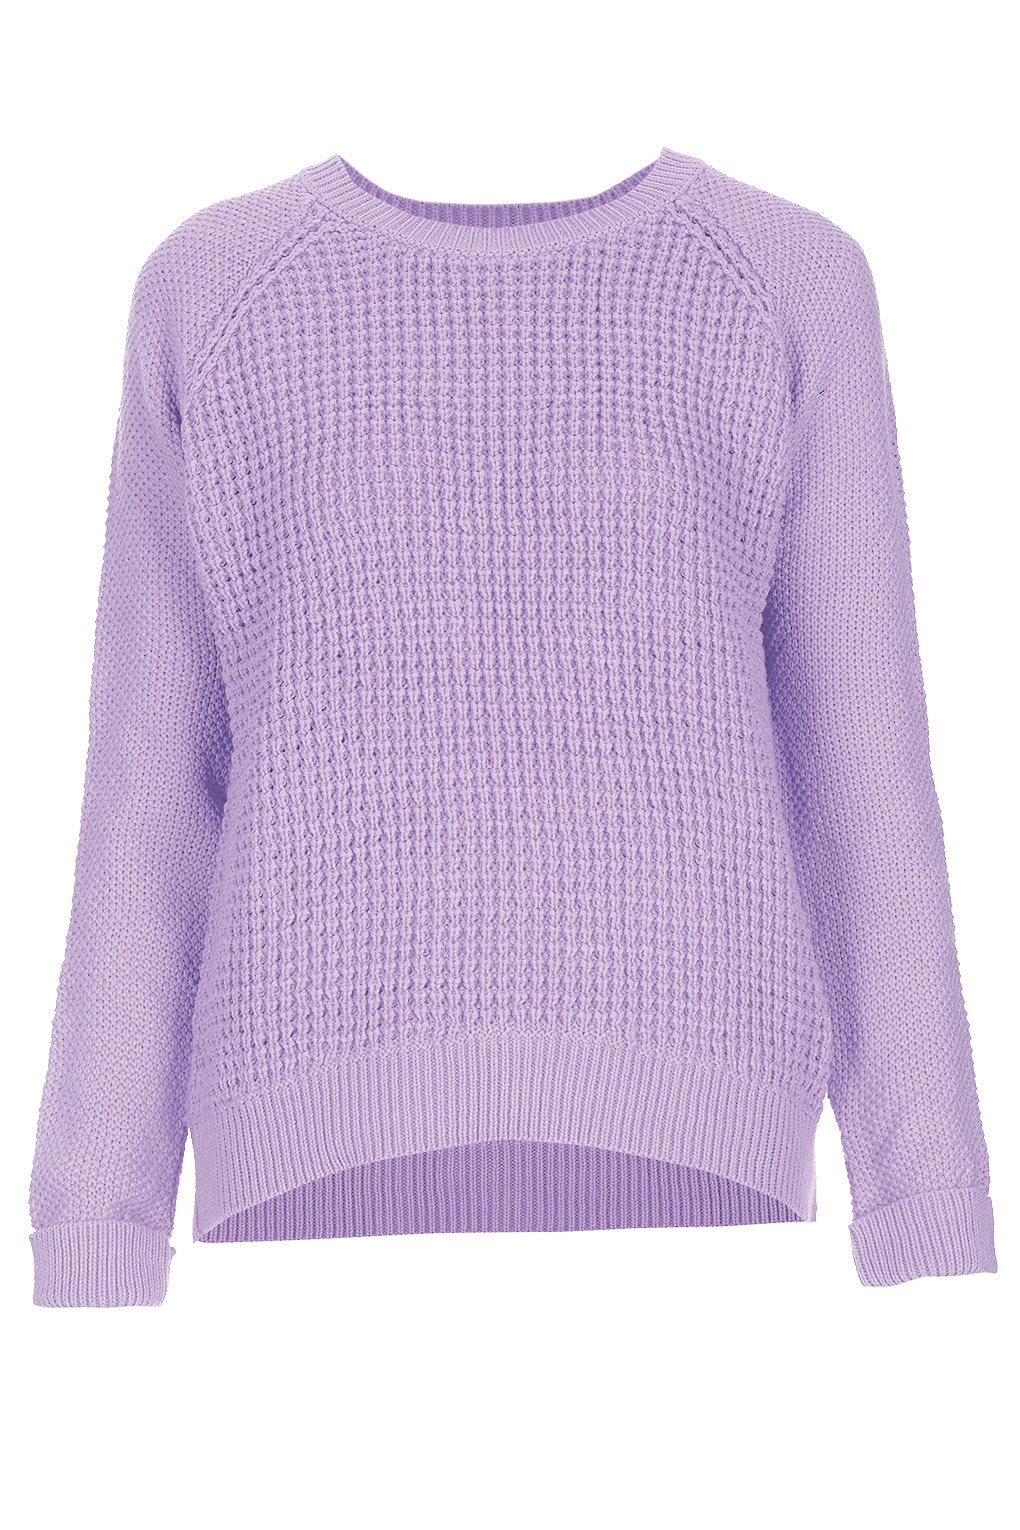 TOPSHOP Knitted Mix Stitch Jumper in Lilac (Purple) - Lyst